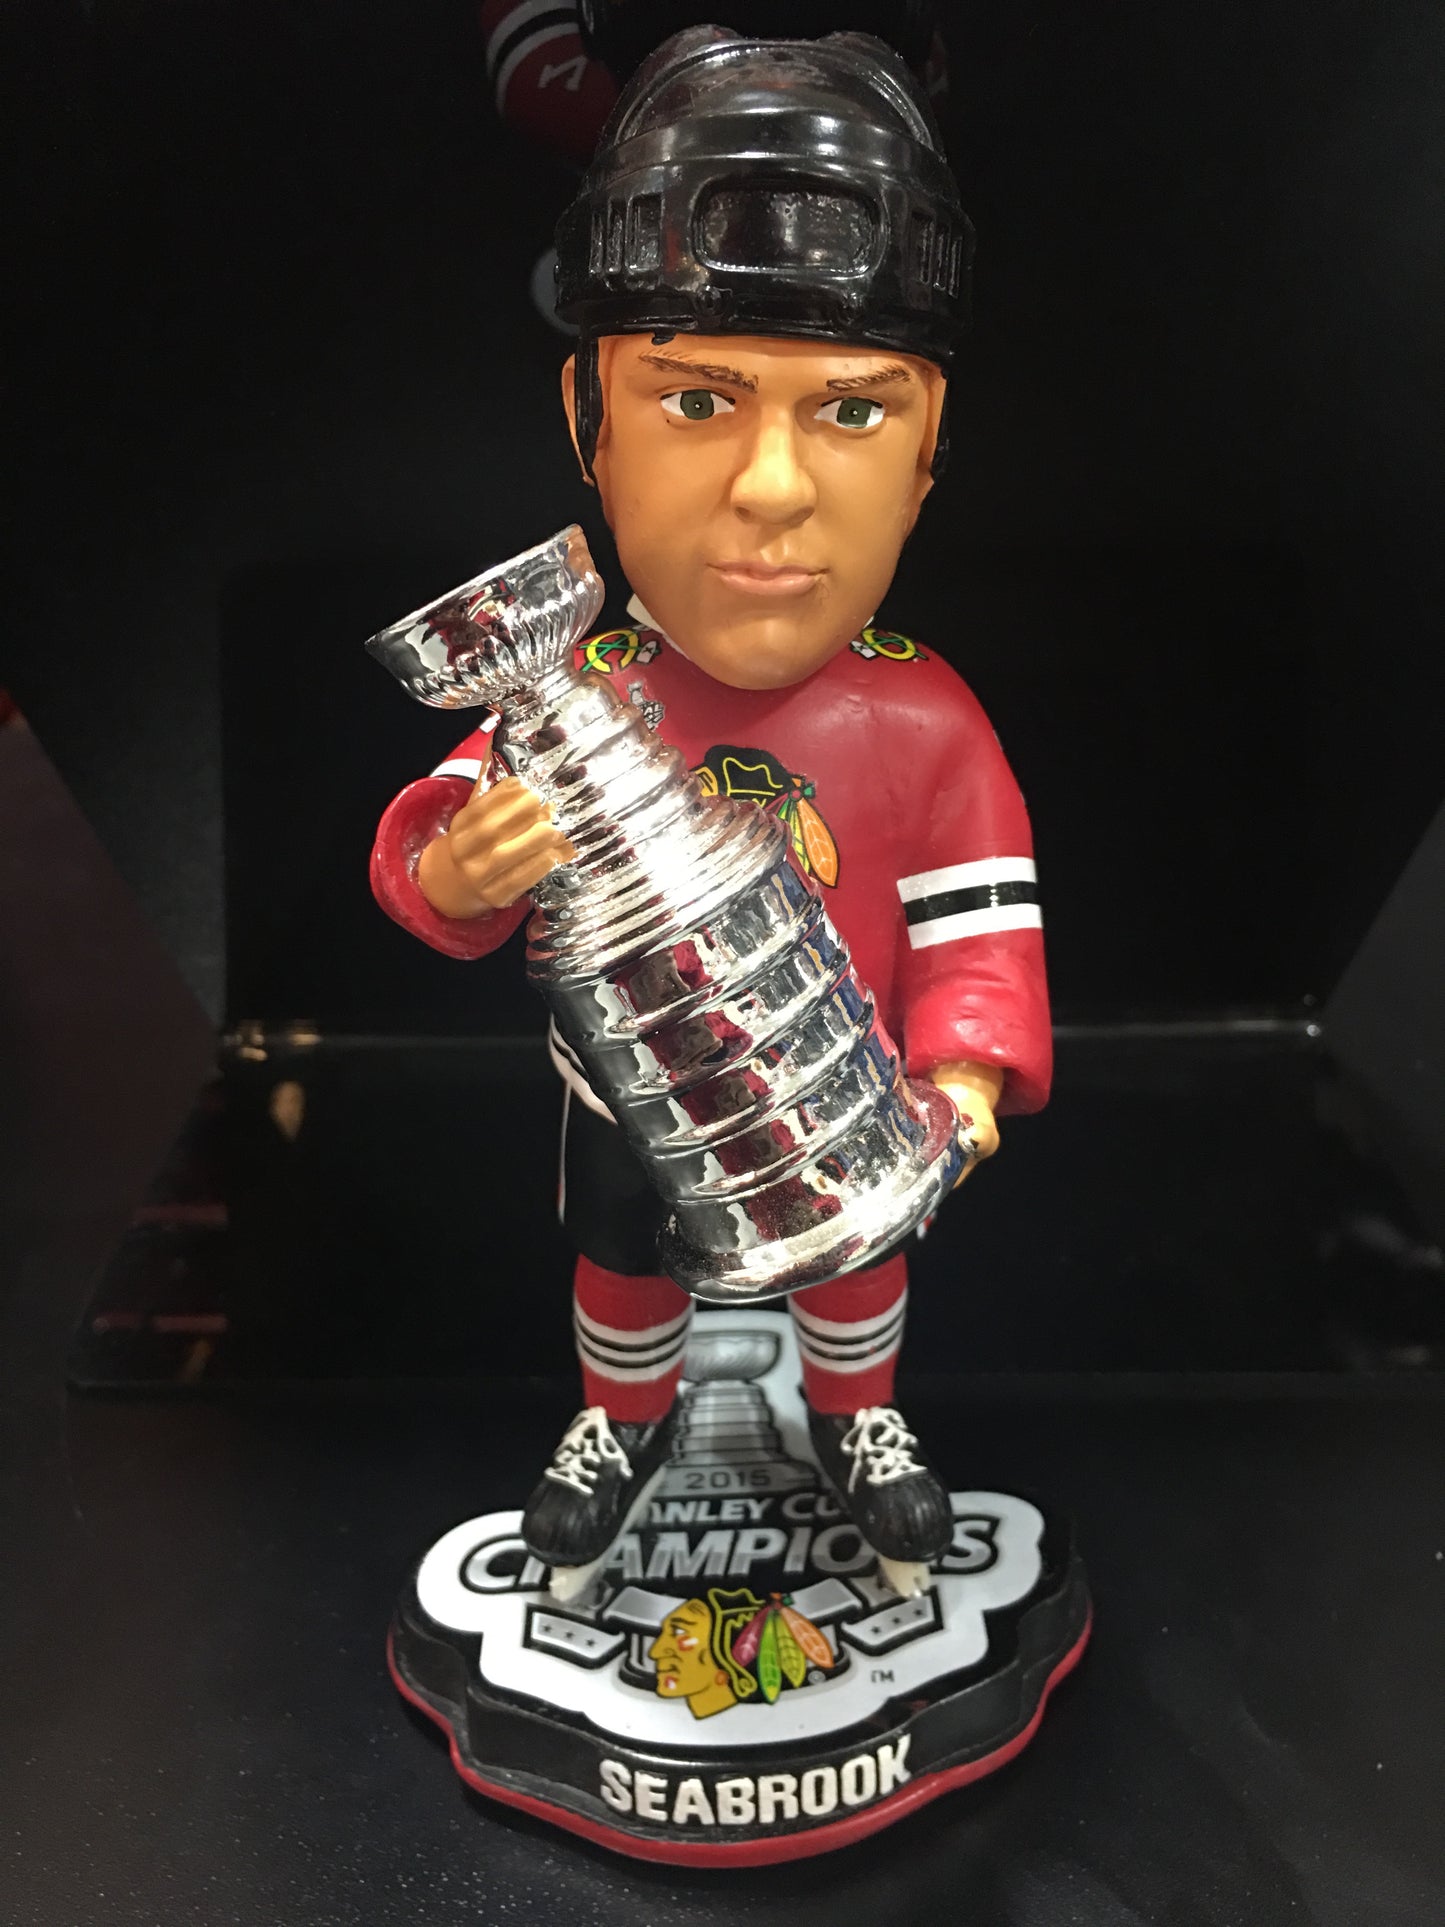 Chicago Blackhawks Brent Seabrook 2015 Stanley Cup Champions Bobblehead